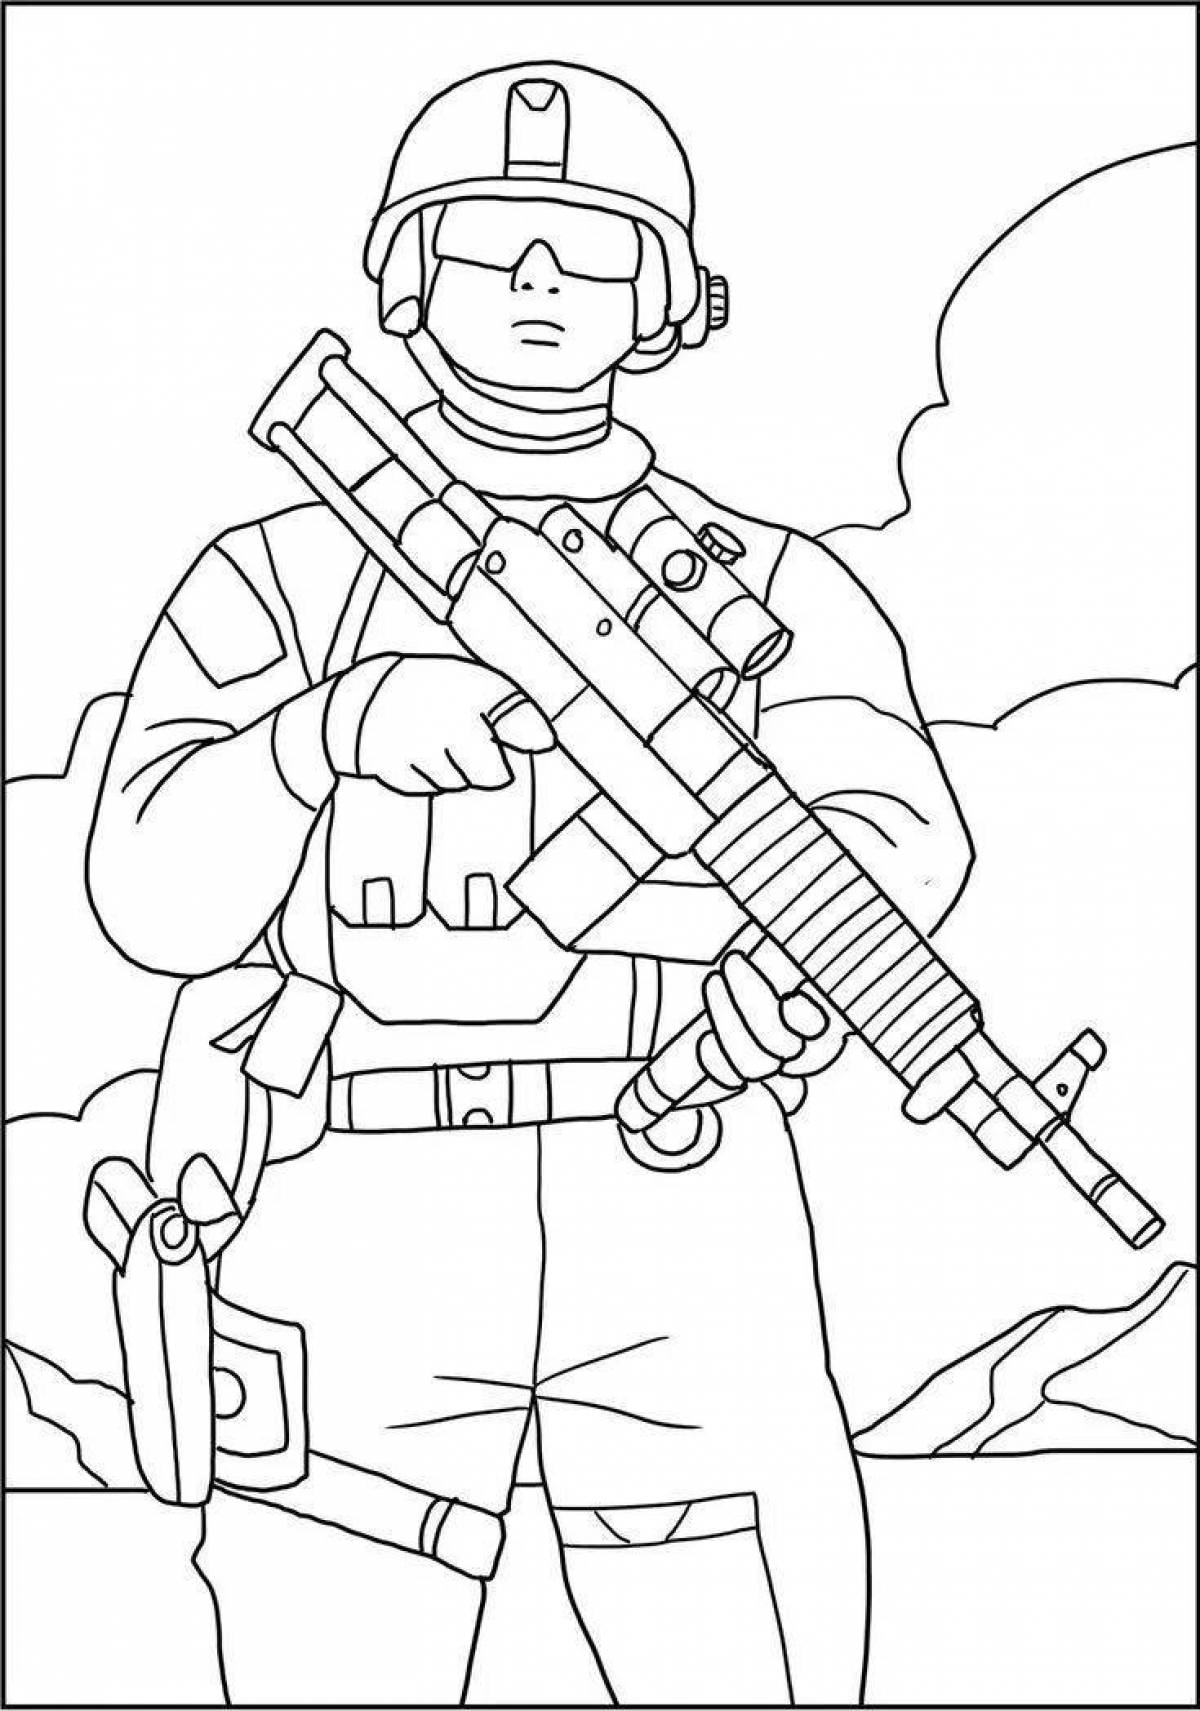 Cocky Soldier Figurine Coloring Page